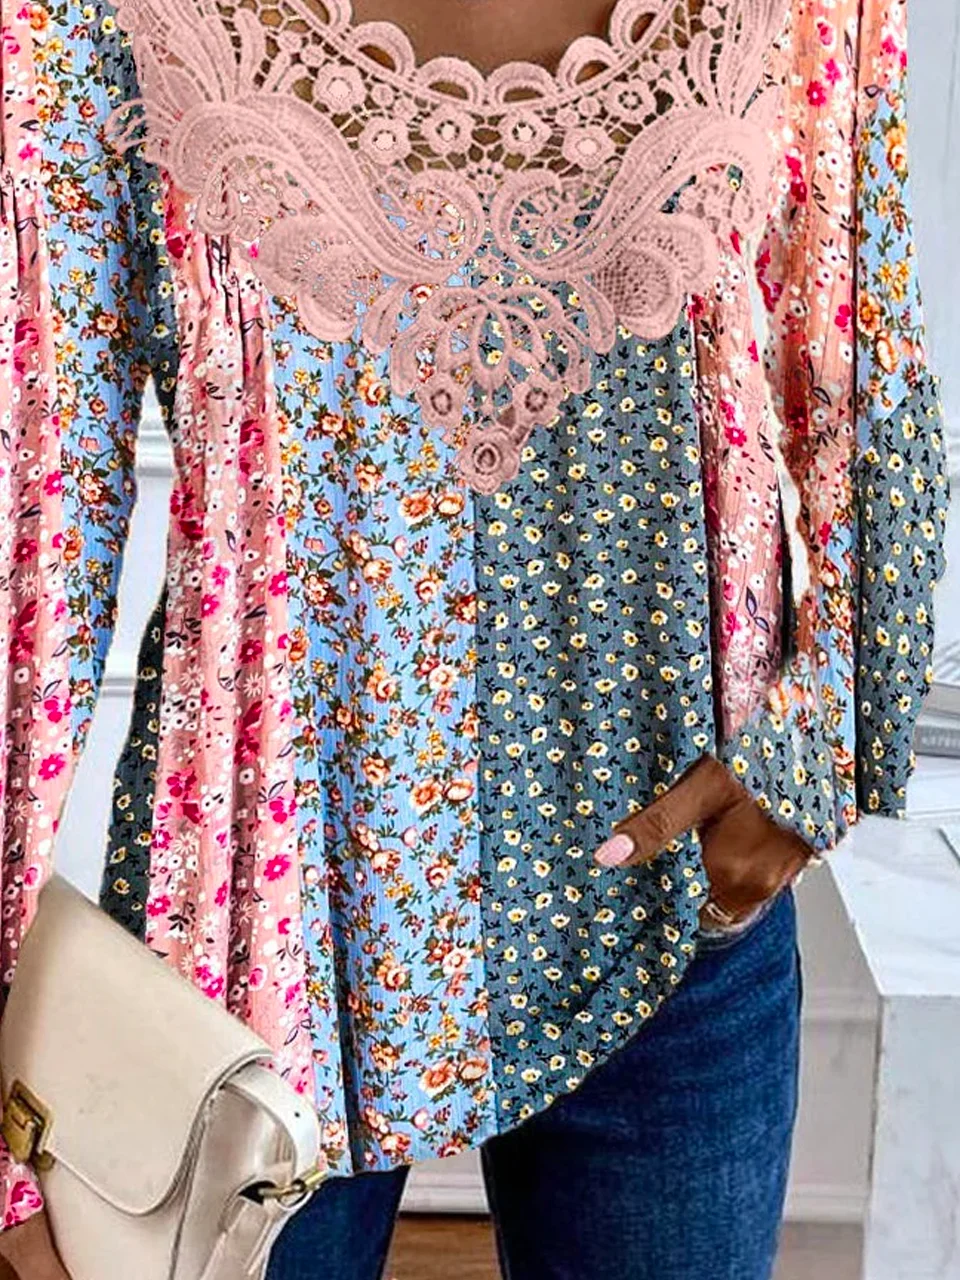 Lace Casual Floral Shirt